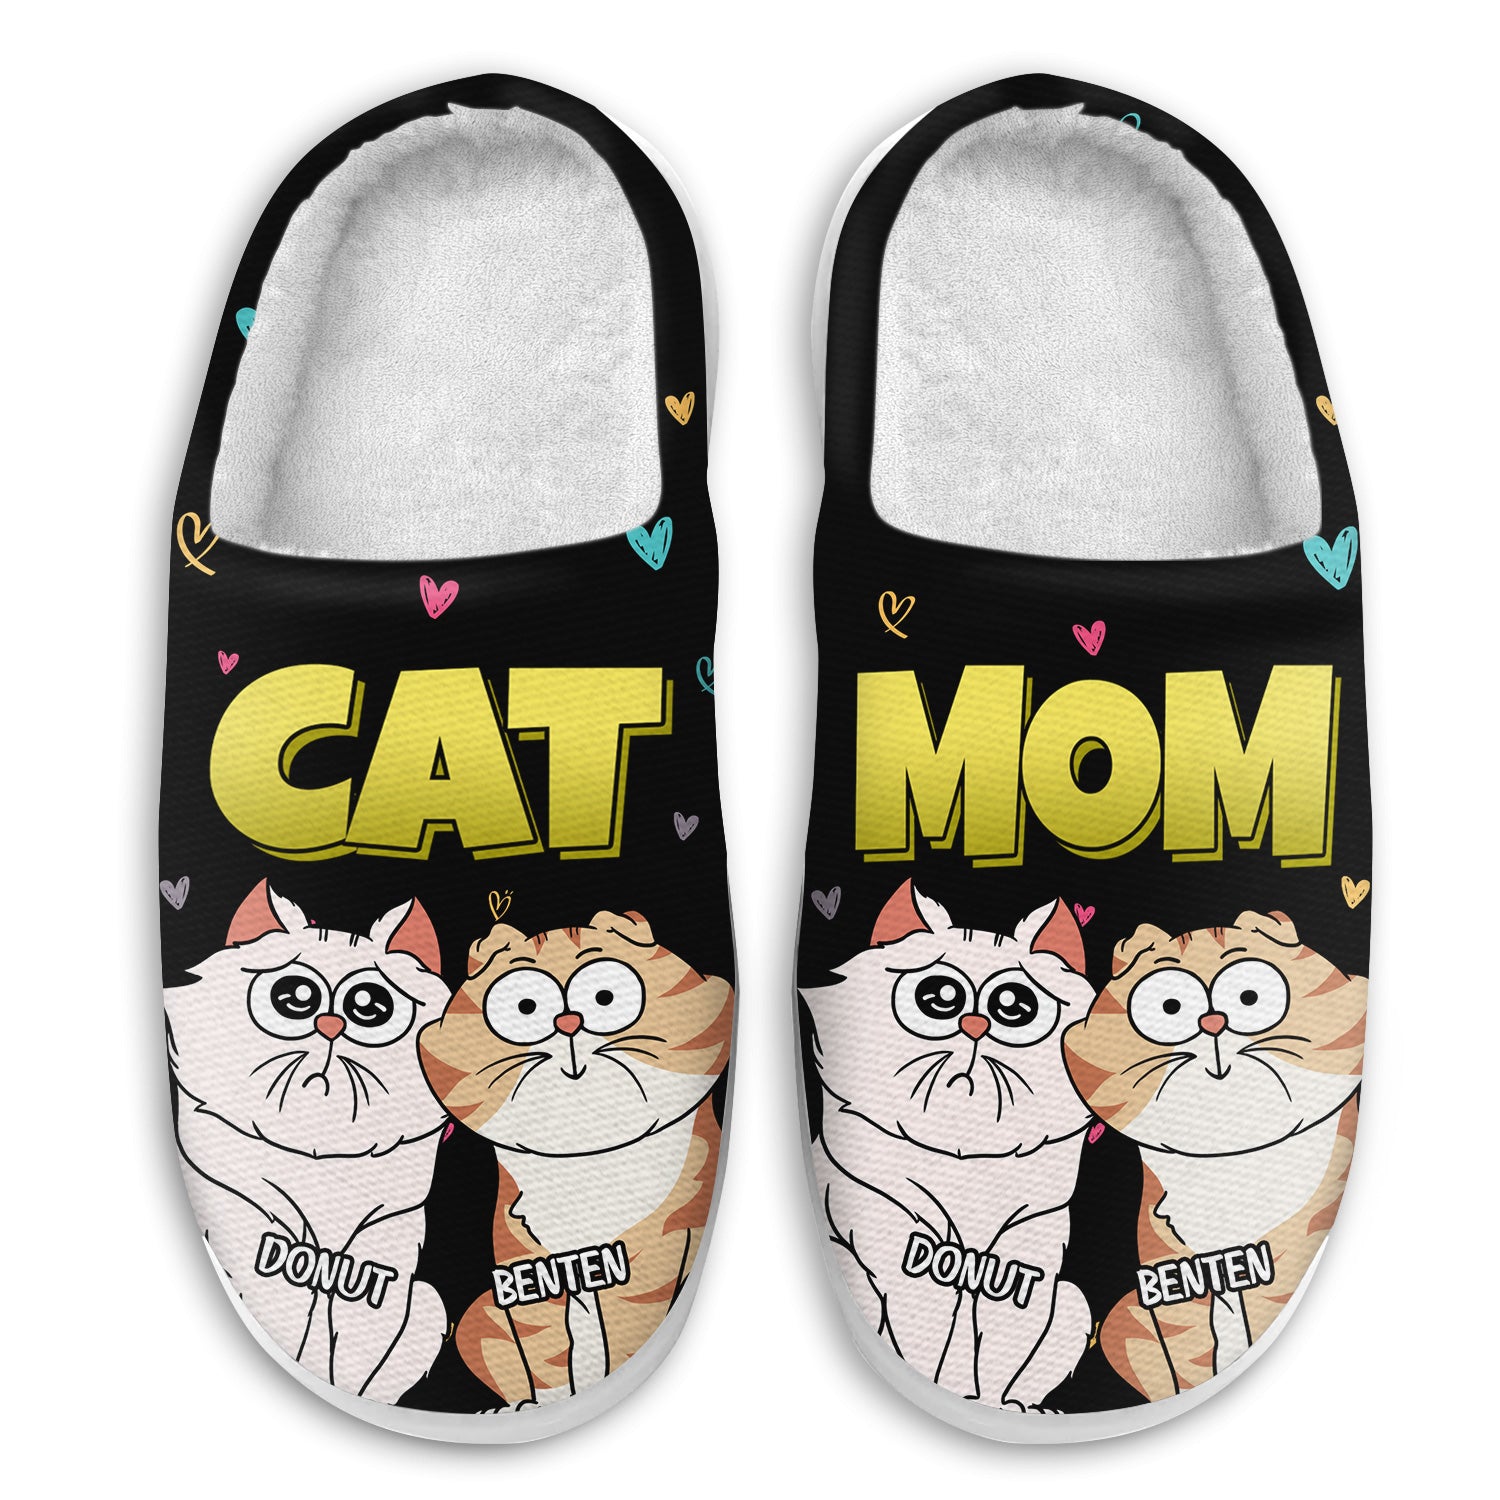 Cat Mom Cartoon - Gift For Cat Mom, Cat Lovers - Personalized Fluffy Slippers